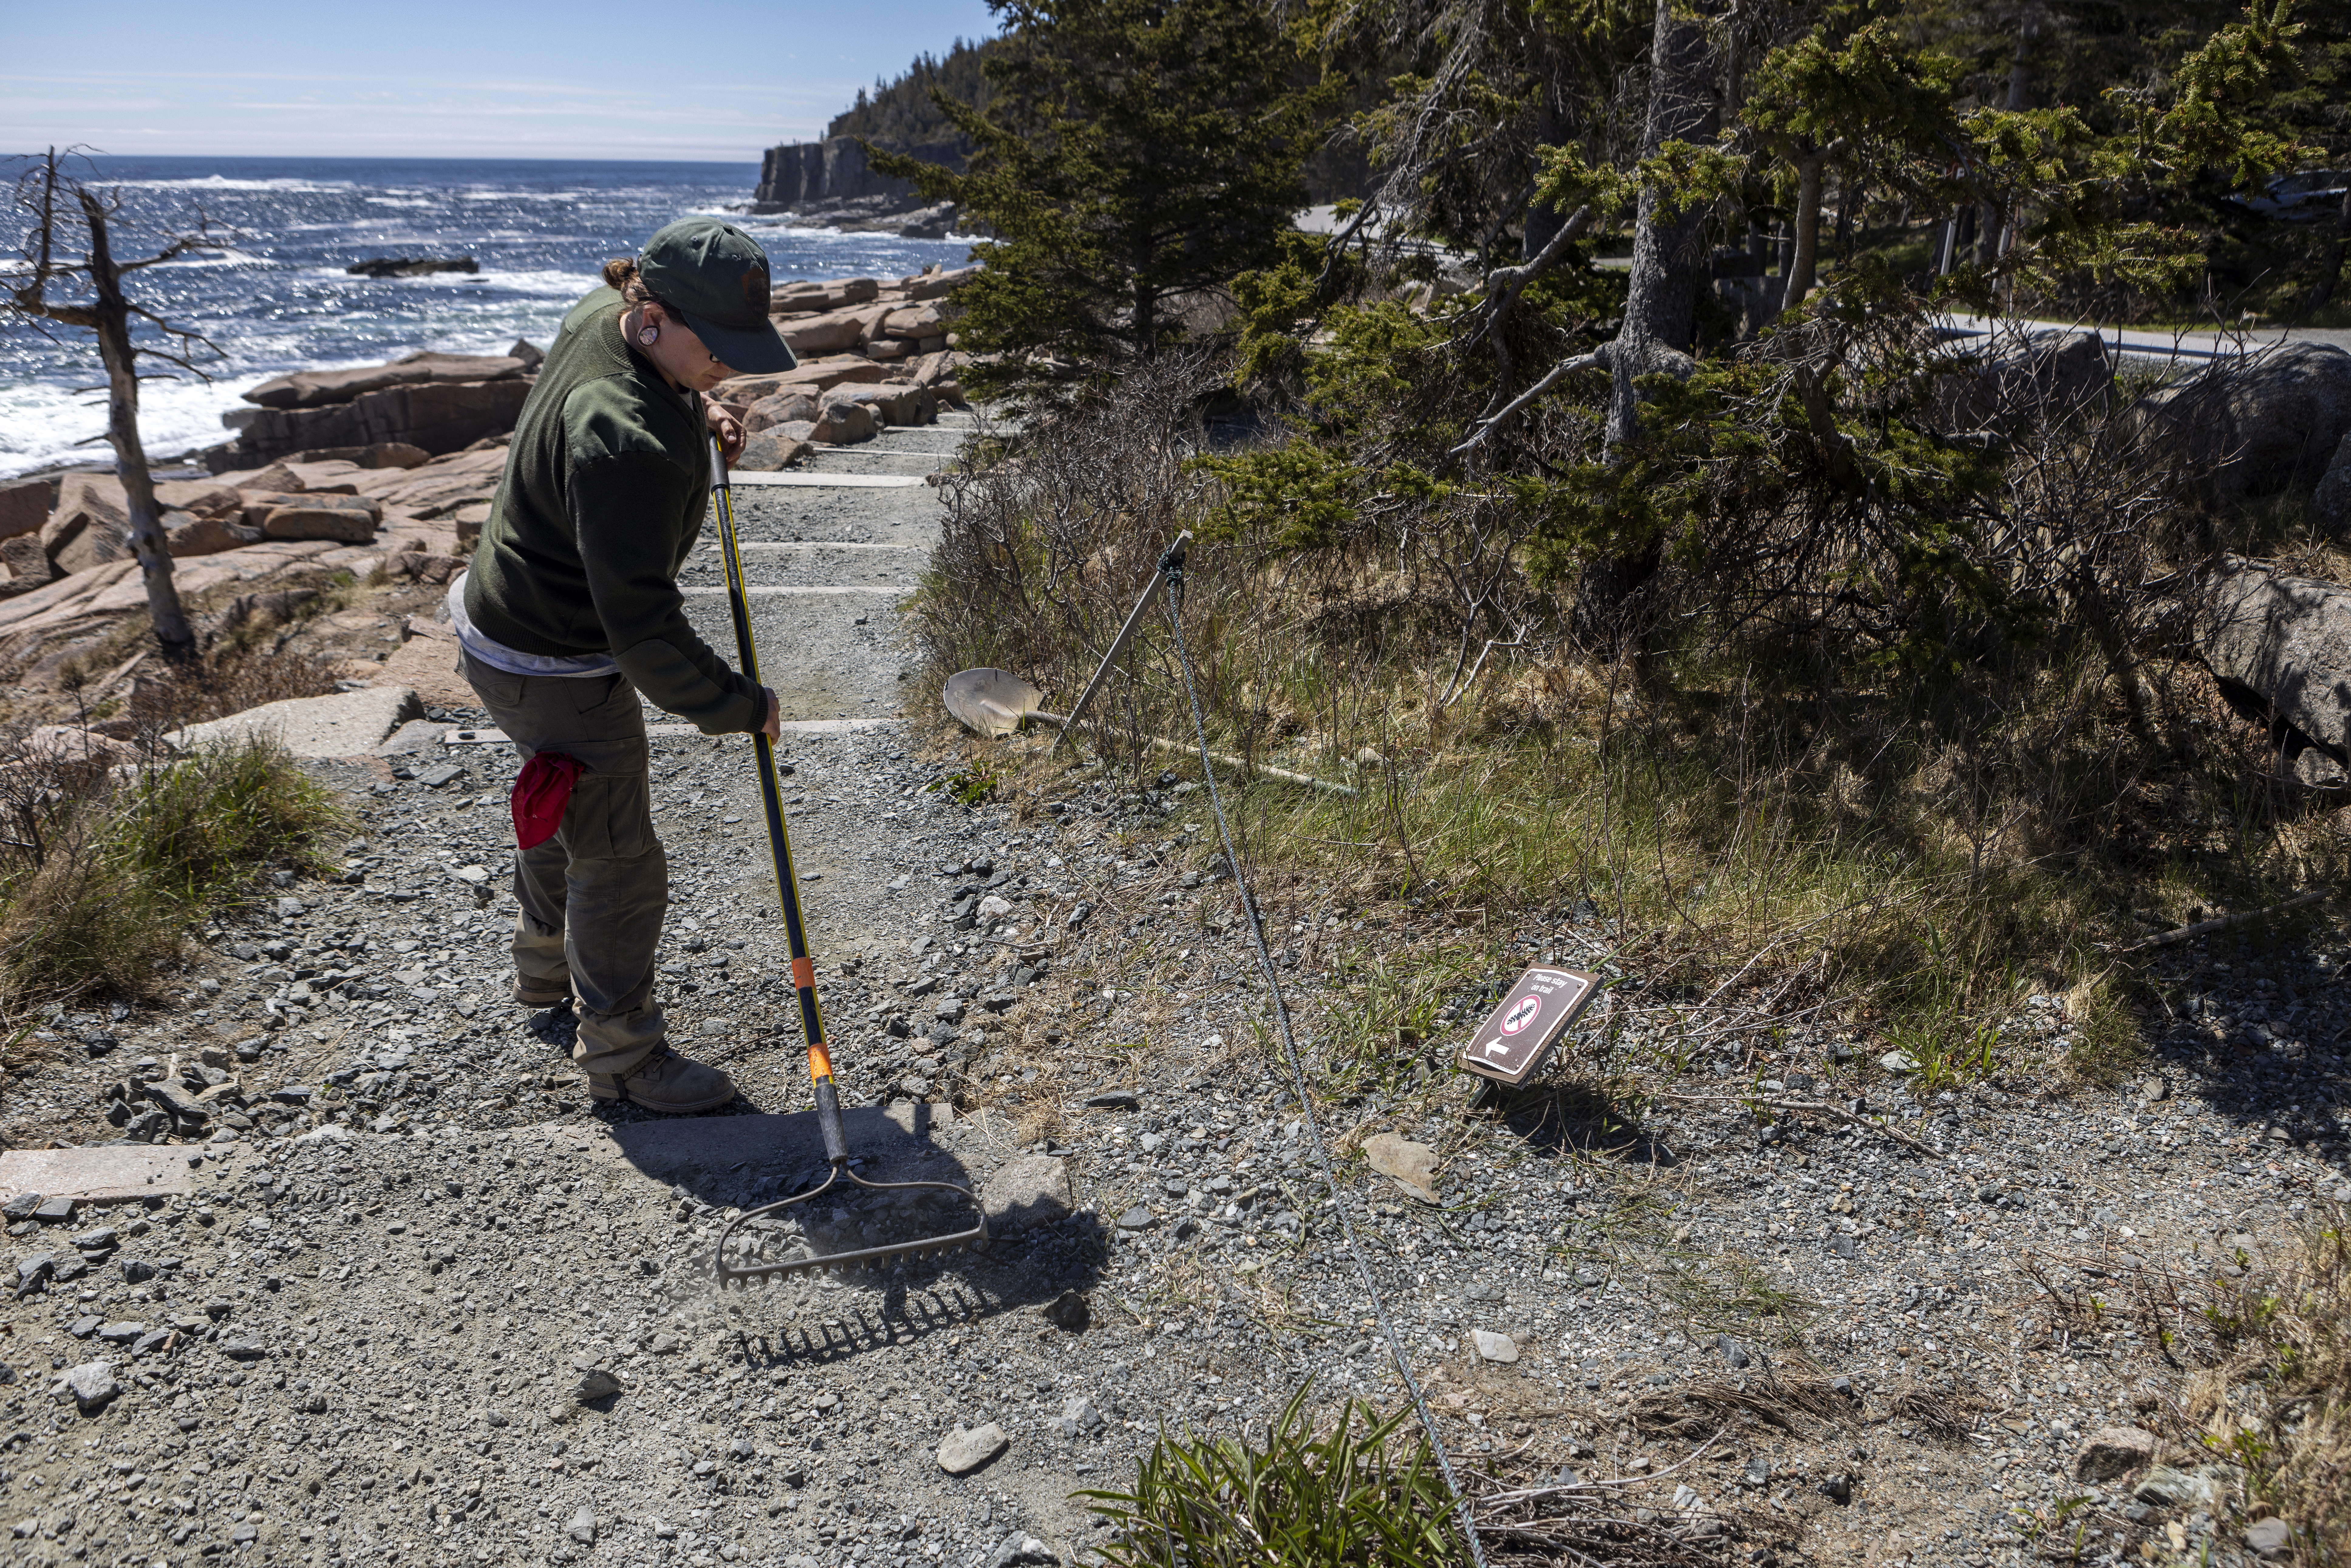 Trail worker helps level a trail by the ocean.